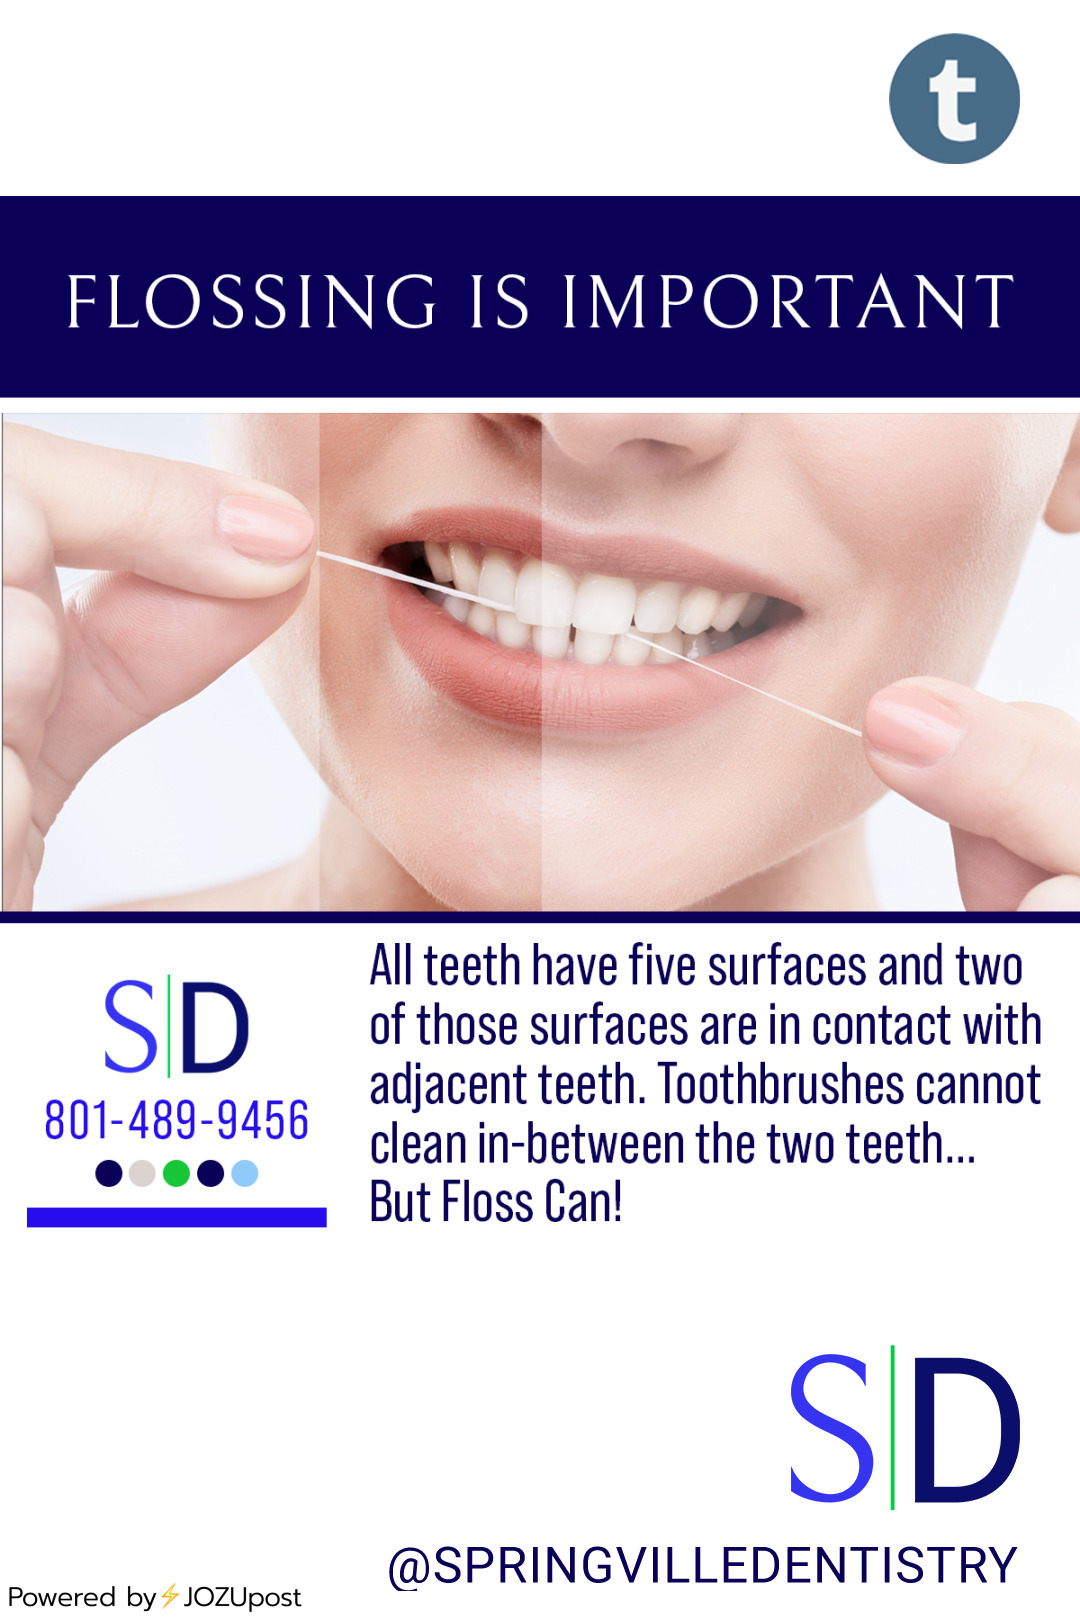 Myth – Flossing is not important
It is absolutely not correct that flossing is not important. The truth is that It IS important to gently floss at least once a day to maintain optimum oral health.
All teeth have five surfaces and two of those...